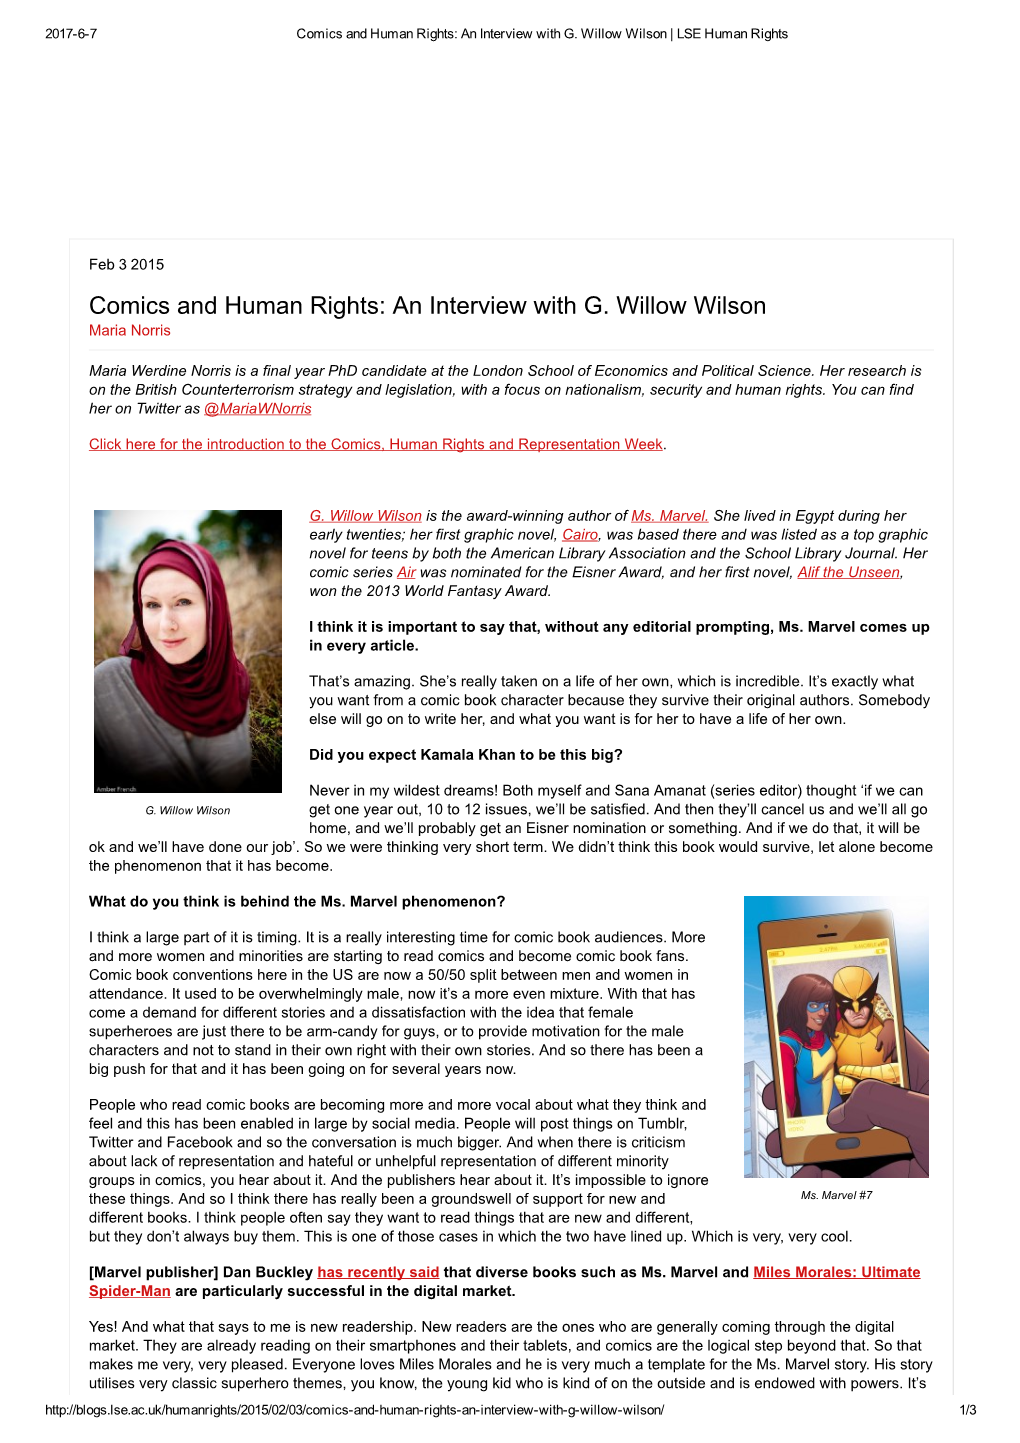 Comics and Human Rights: an Interview with G. Willow Wilson | LSE Human Rights